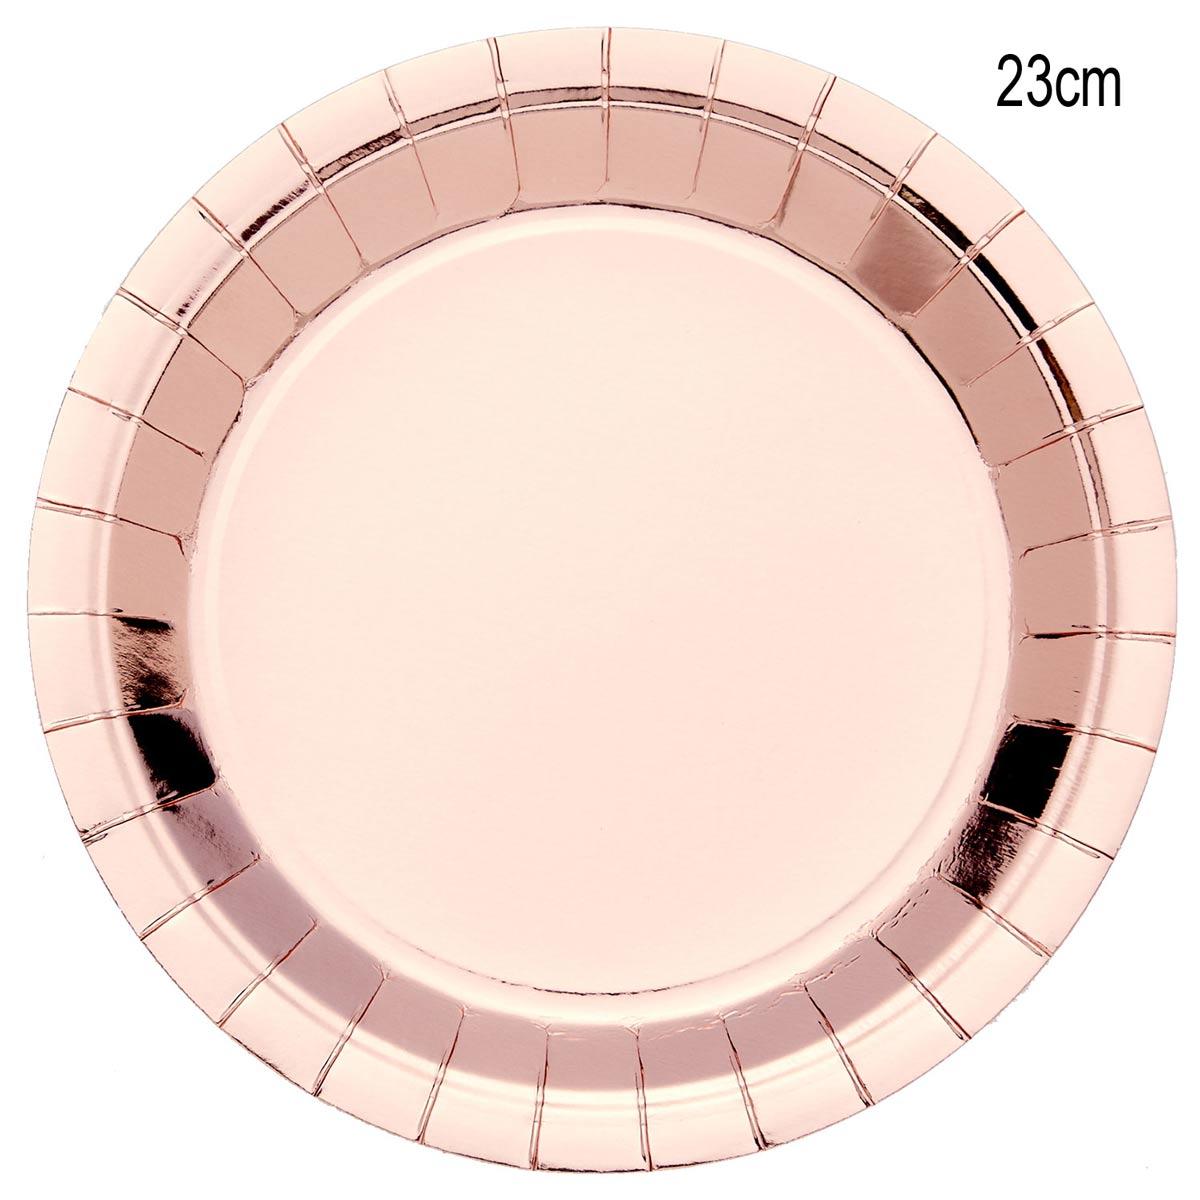 Pack 8 Metallic Rose Gold 23cm Paper Dinner Plates by Amscan 9908645 available here at Karnival Costumes online party shop